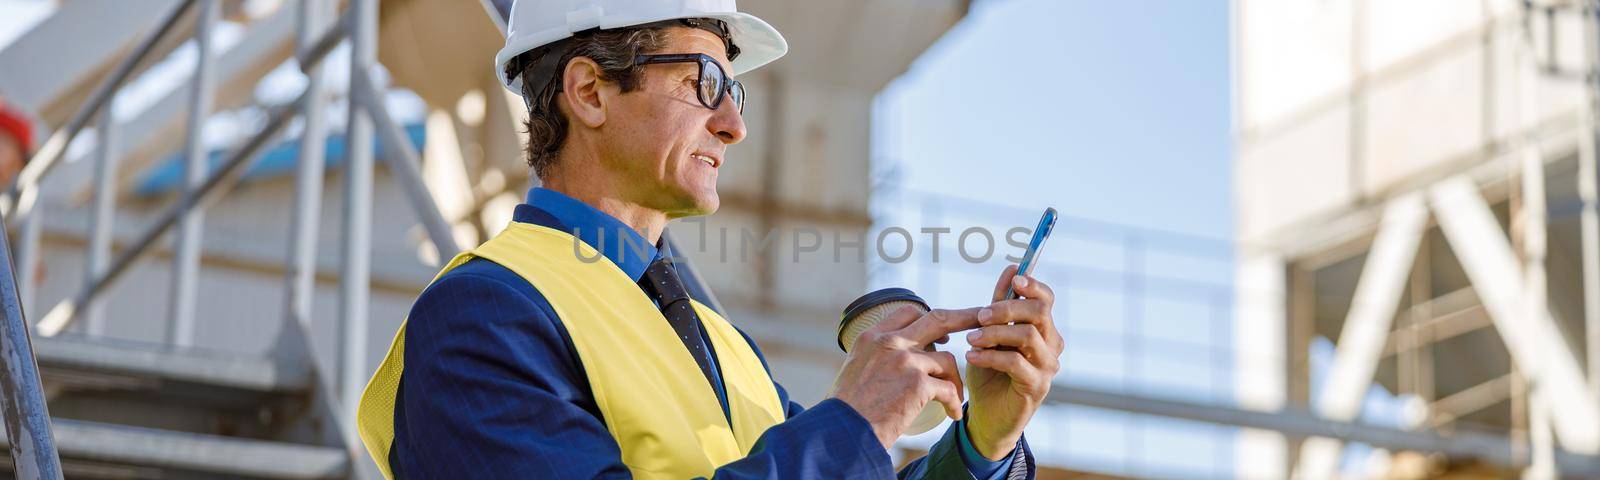 Male engineer using mobile phone outdoors at factory by Yaroslav_astakhov